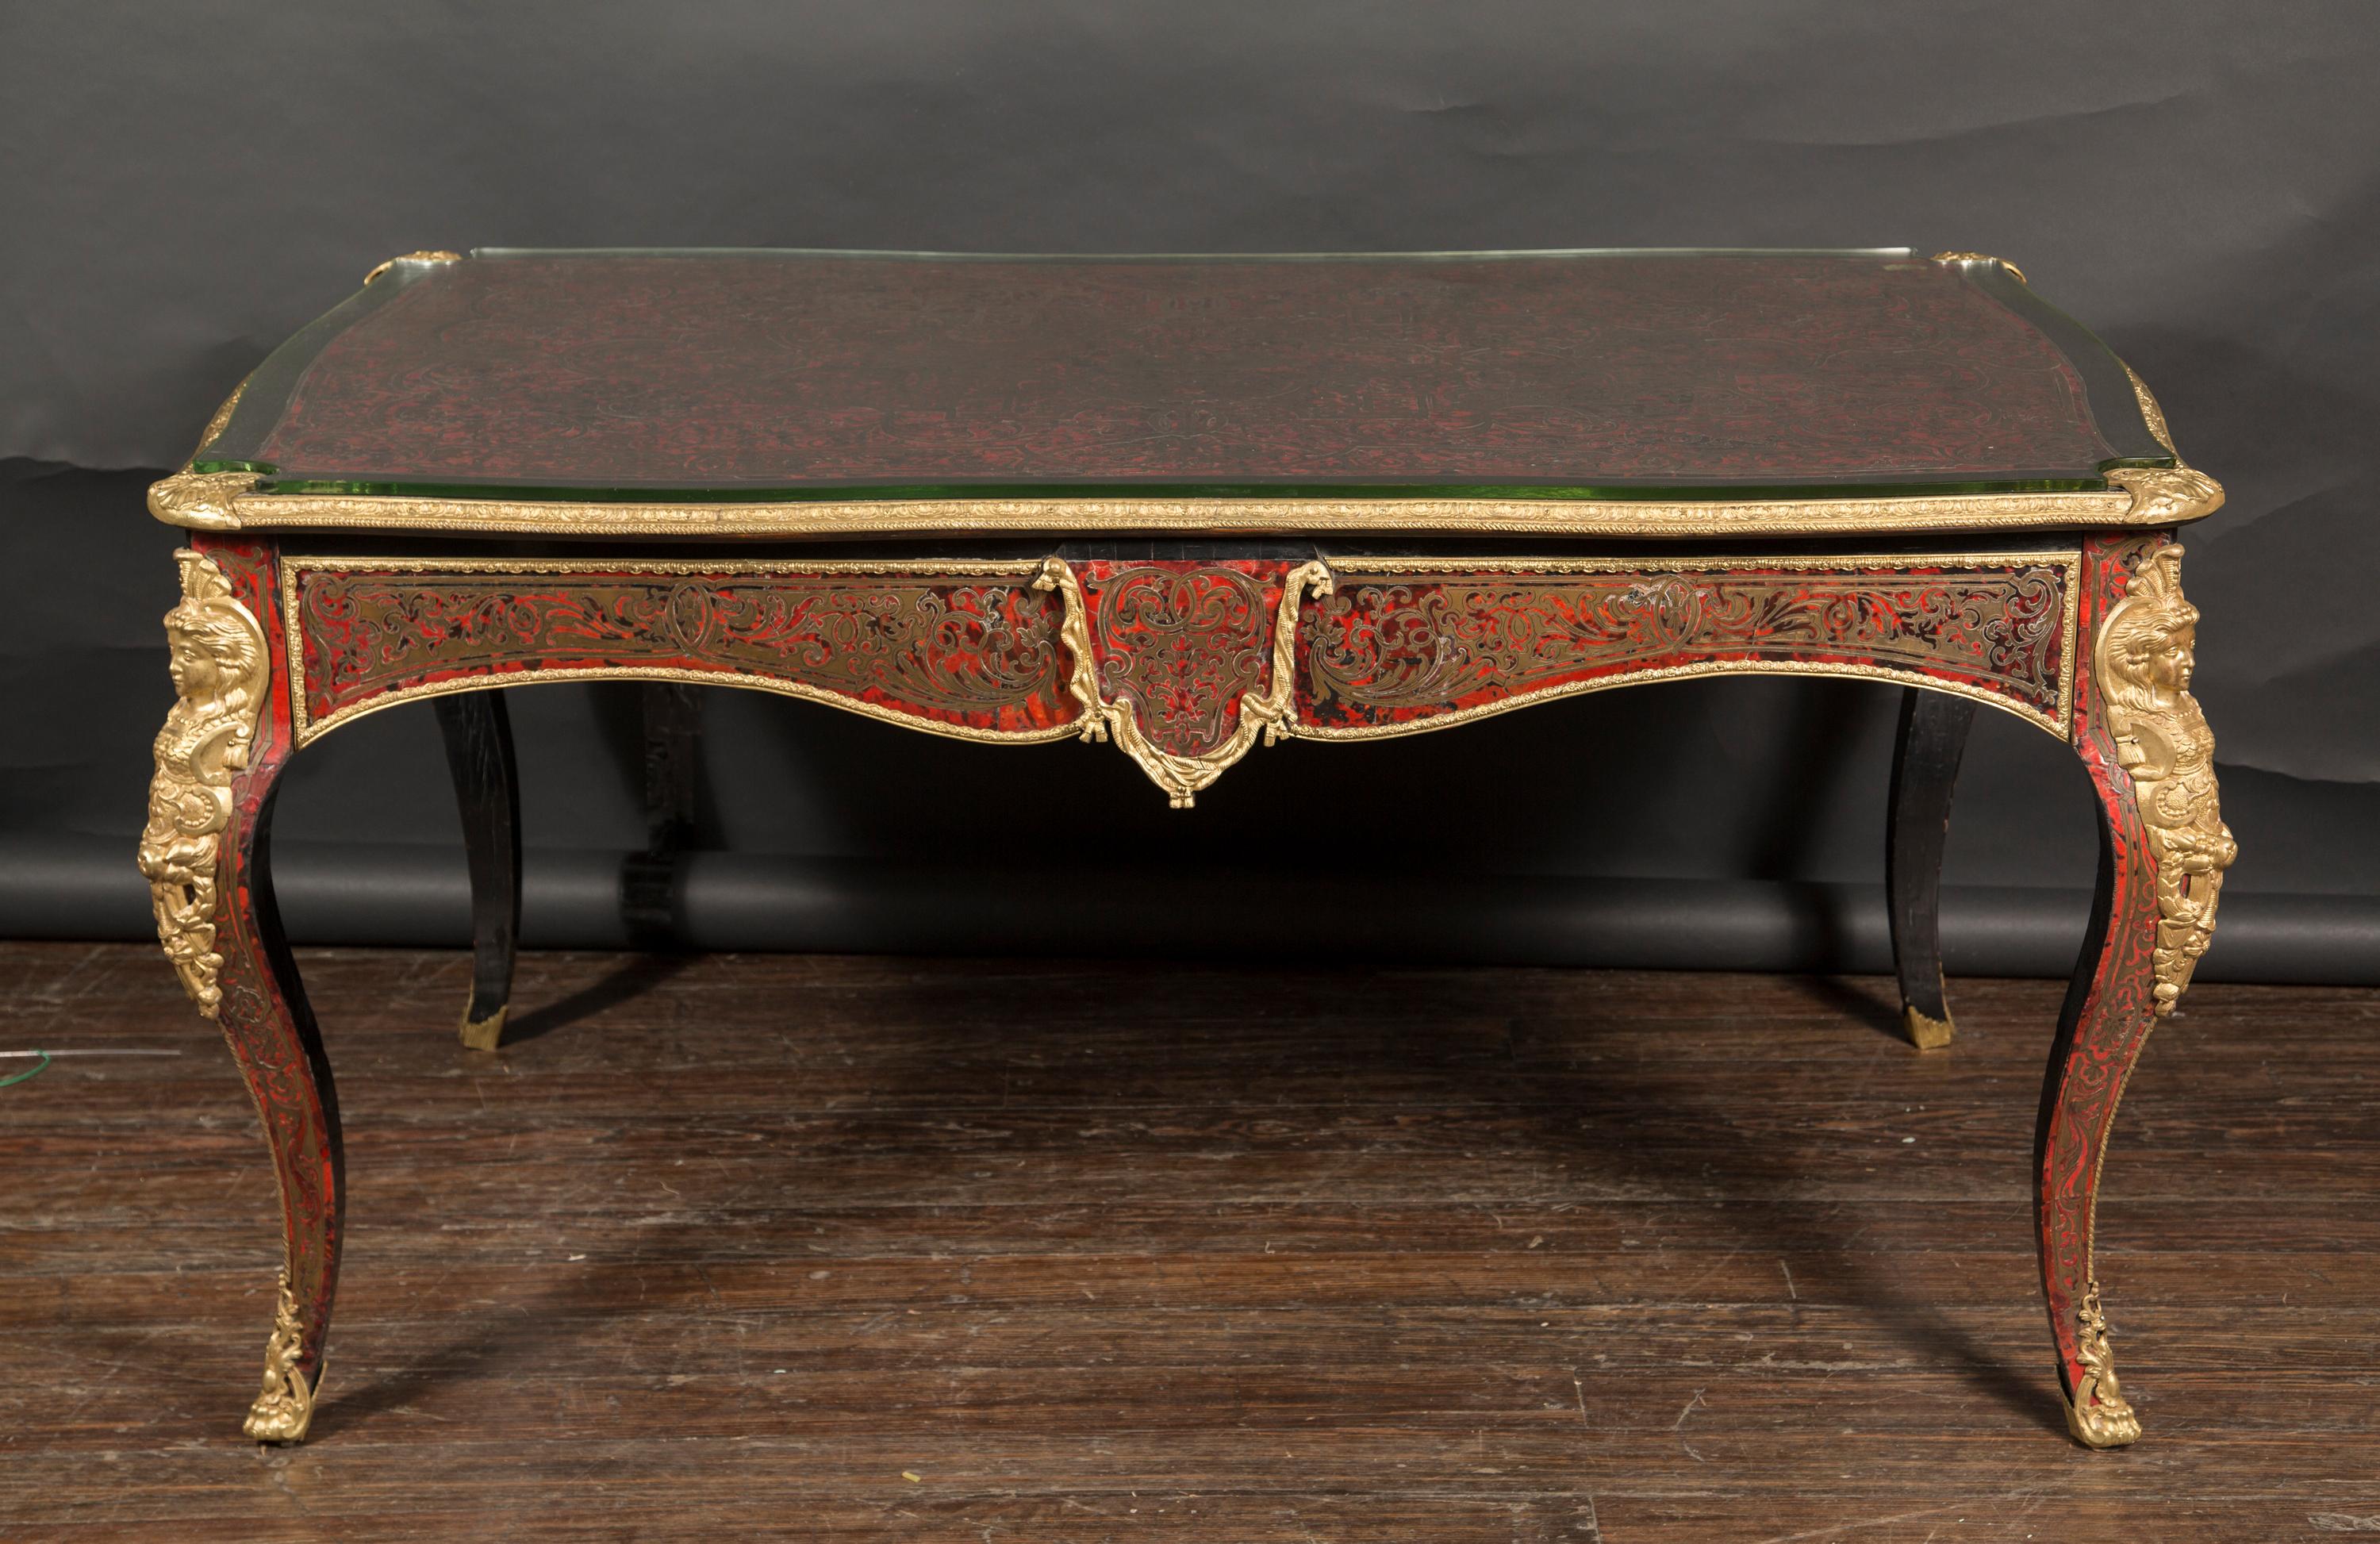 This magnificent 19th century tortoiseshell Boulle desk features gorgeous bronze mounts and sculpted brass inlaid in the tortoise shell. The desk is created in the style of Louis XV with cabriole legs, each mounted with a female allegorical figure.